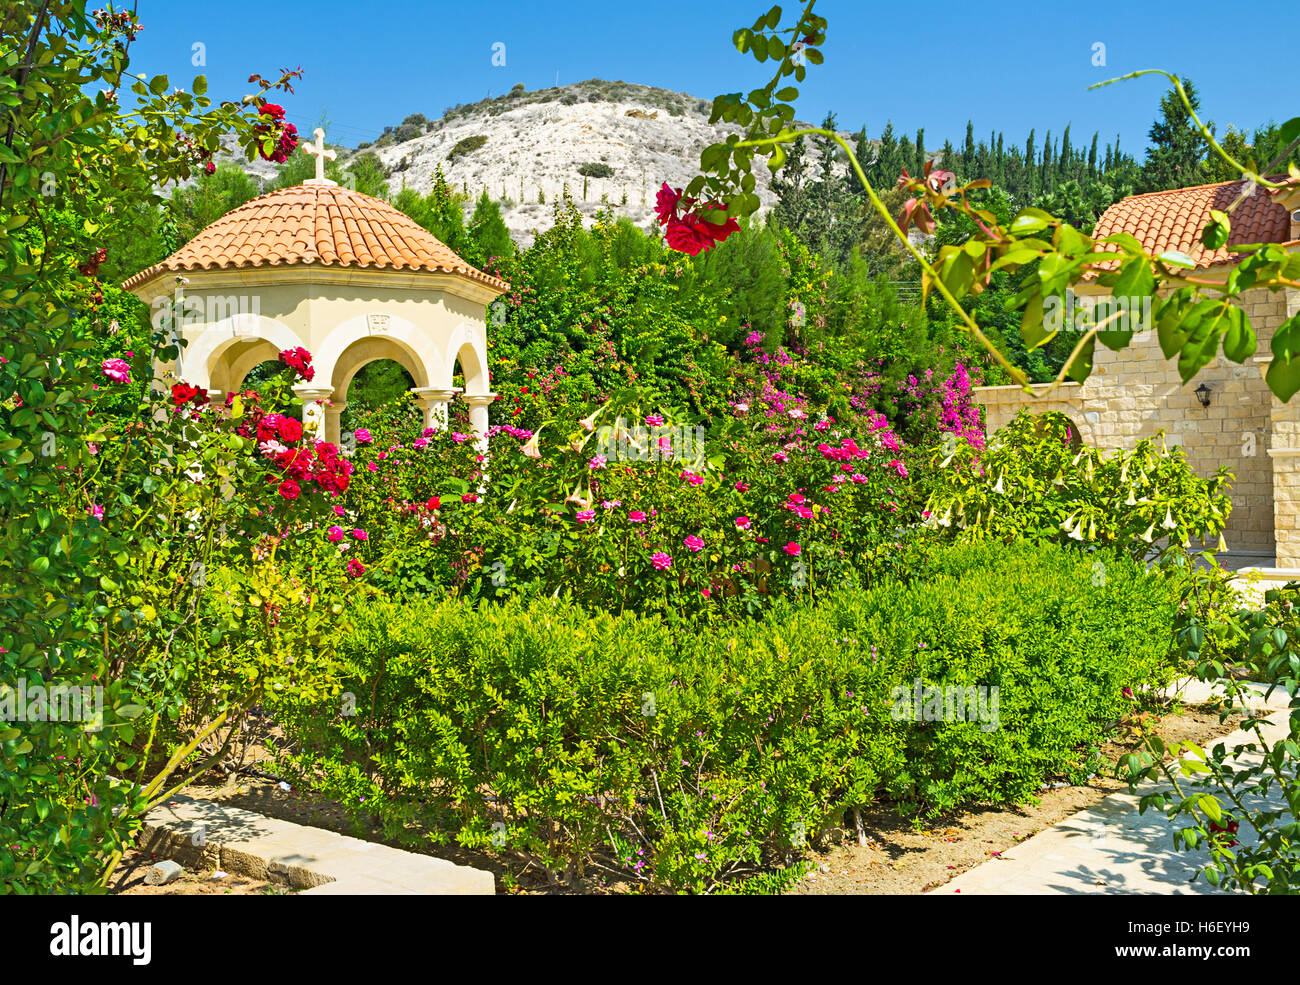 The St George monastery has the rich collection of roses in its beautiful garden, Cyprus. Stock Photo